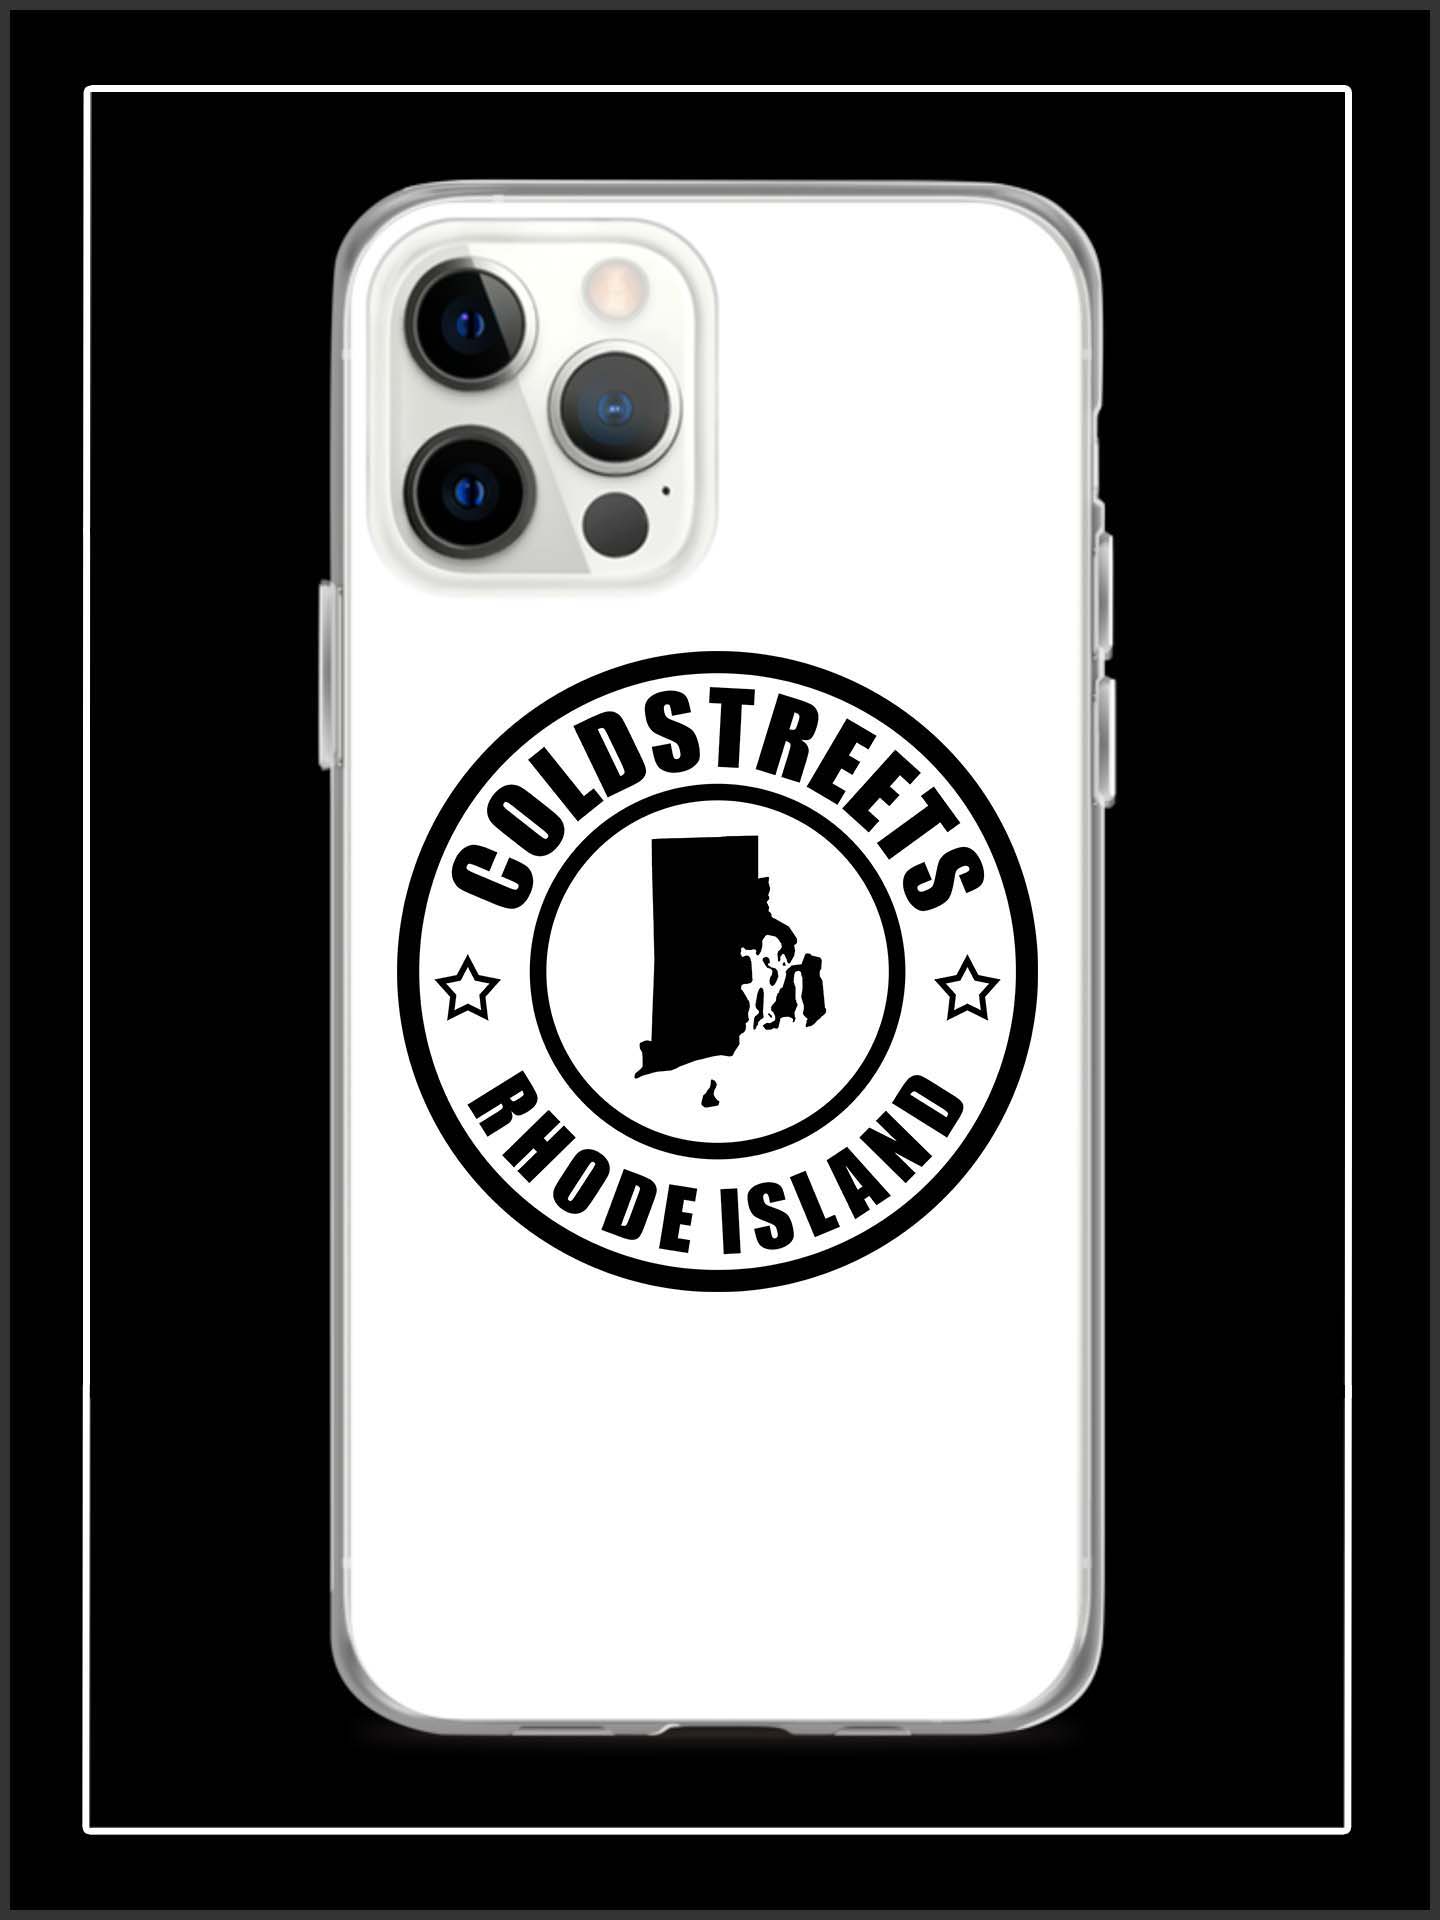 Cold Streets Rhode Island iPhone Cases